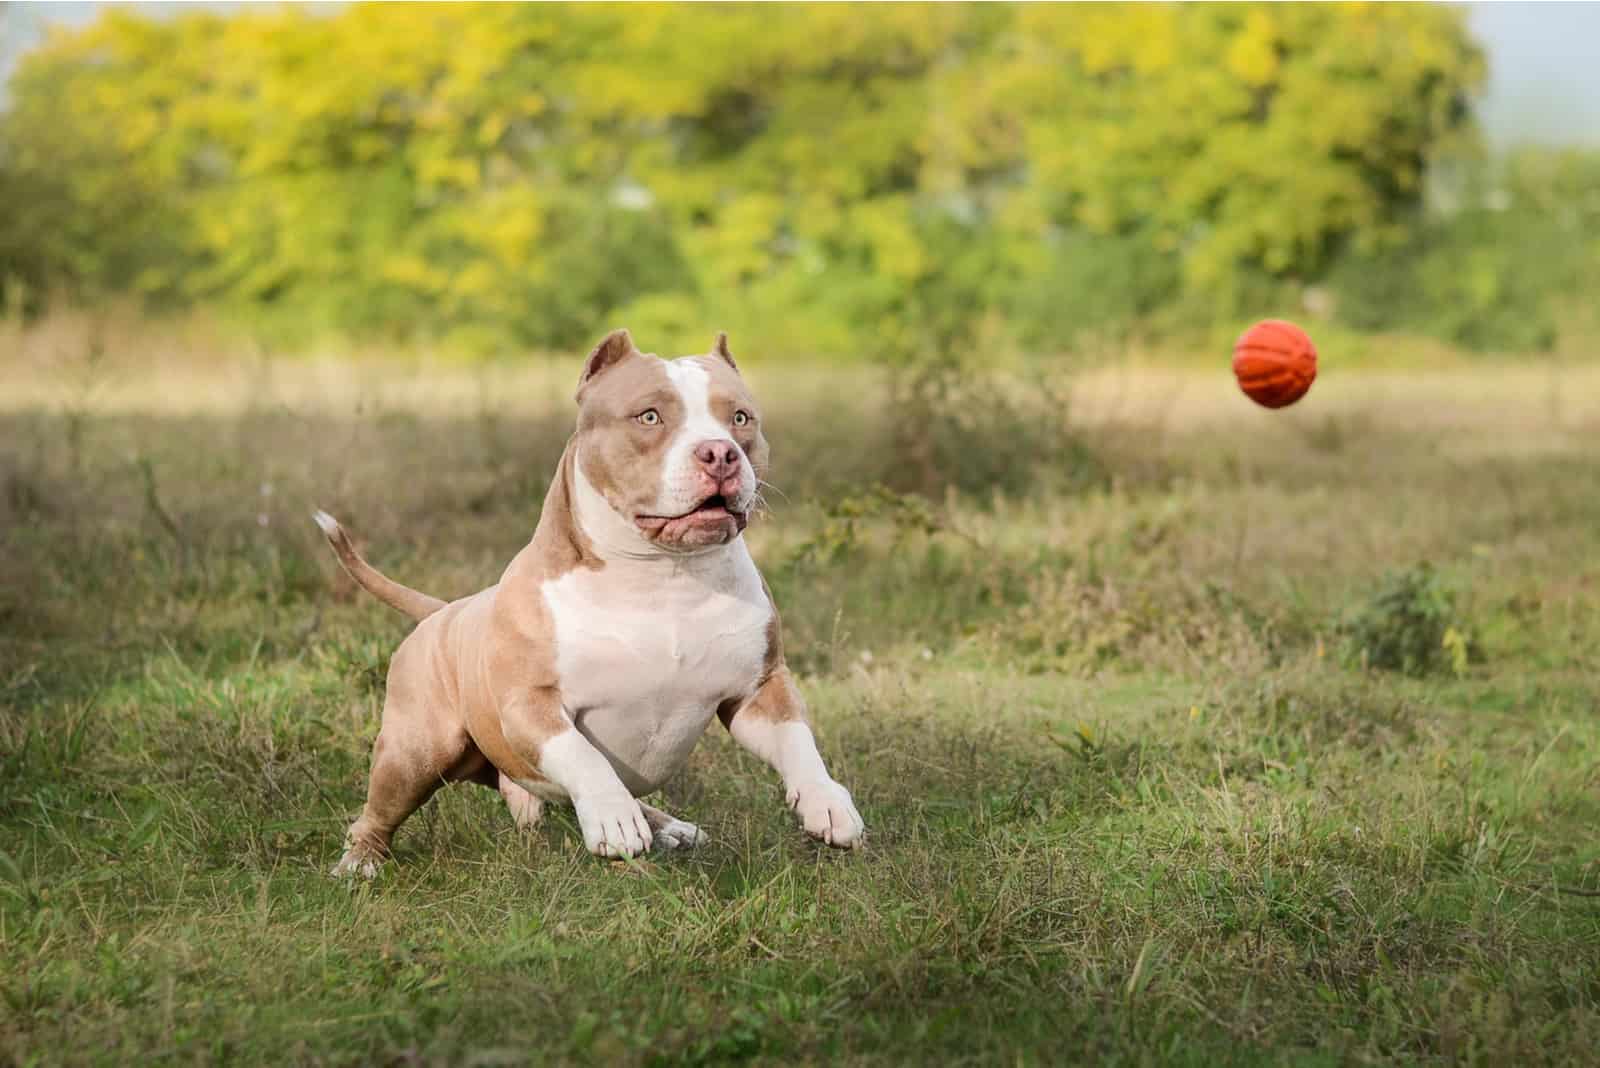 american bully playing with a ball